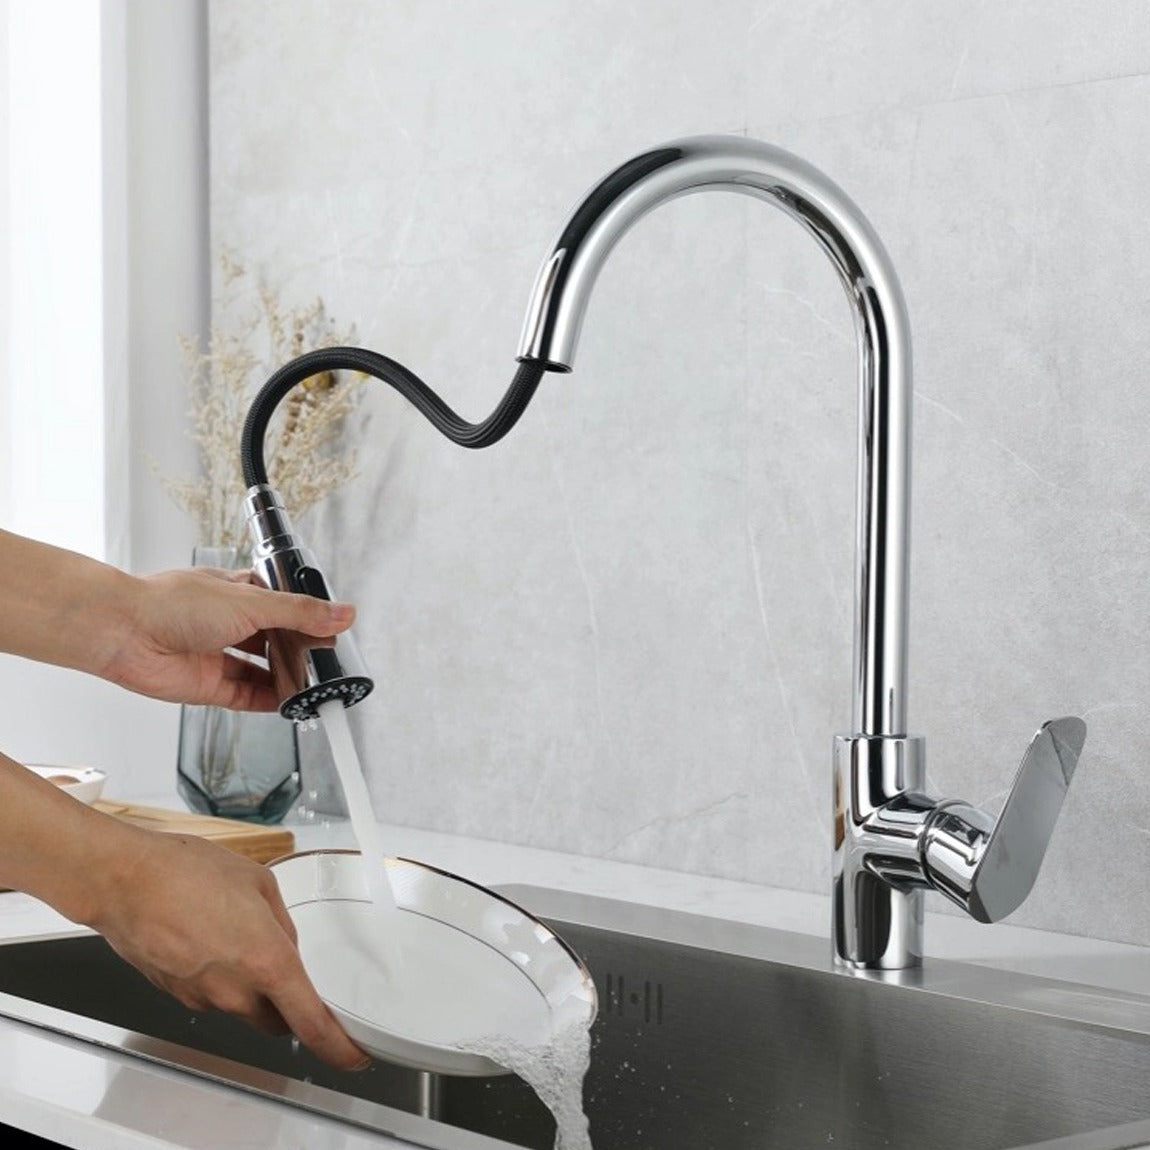 Stainless Steel Kitchen Sink Faucet with Sprayer.